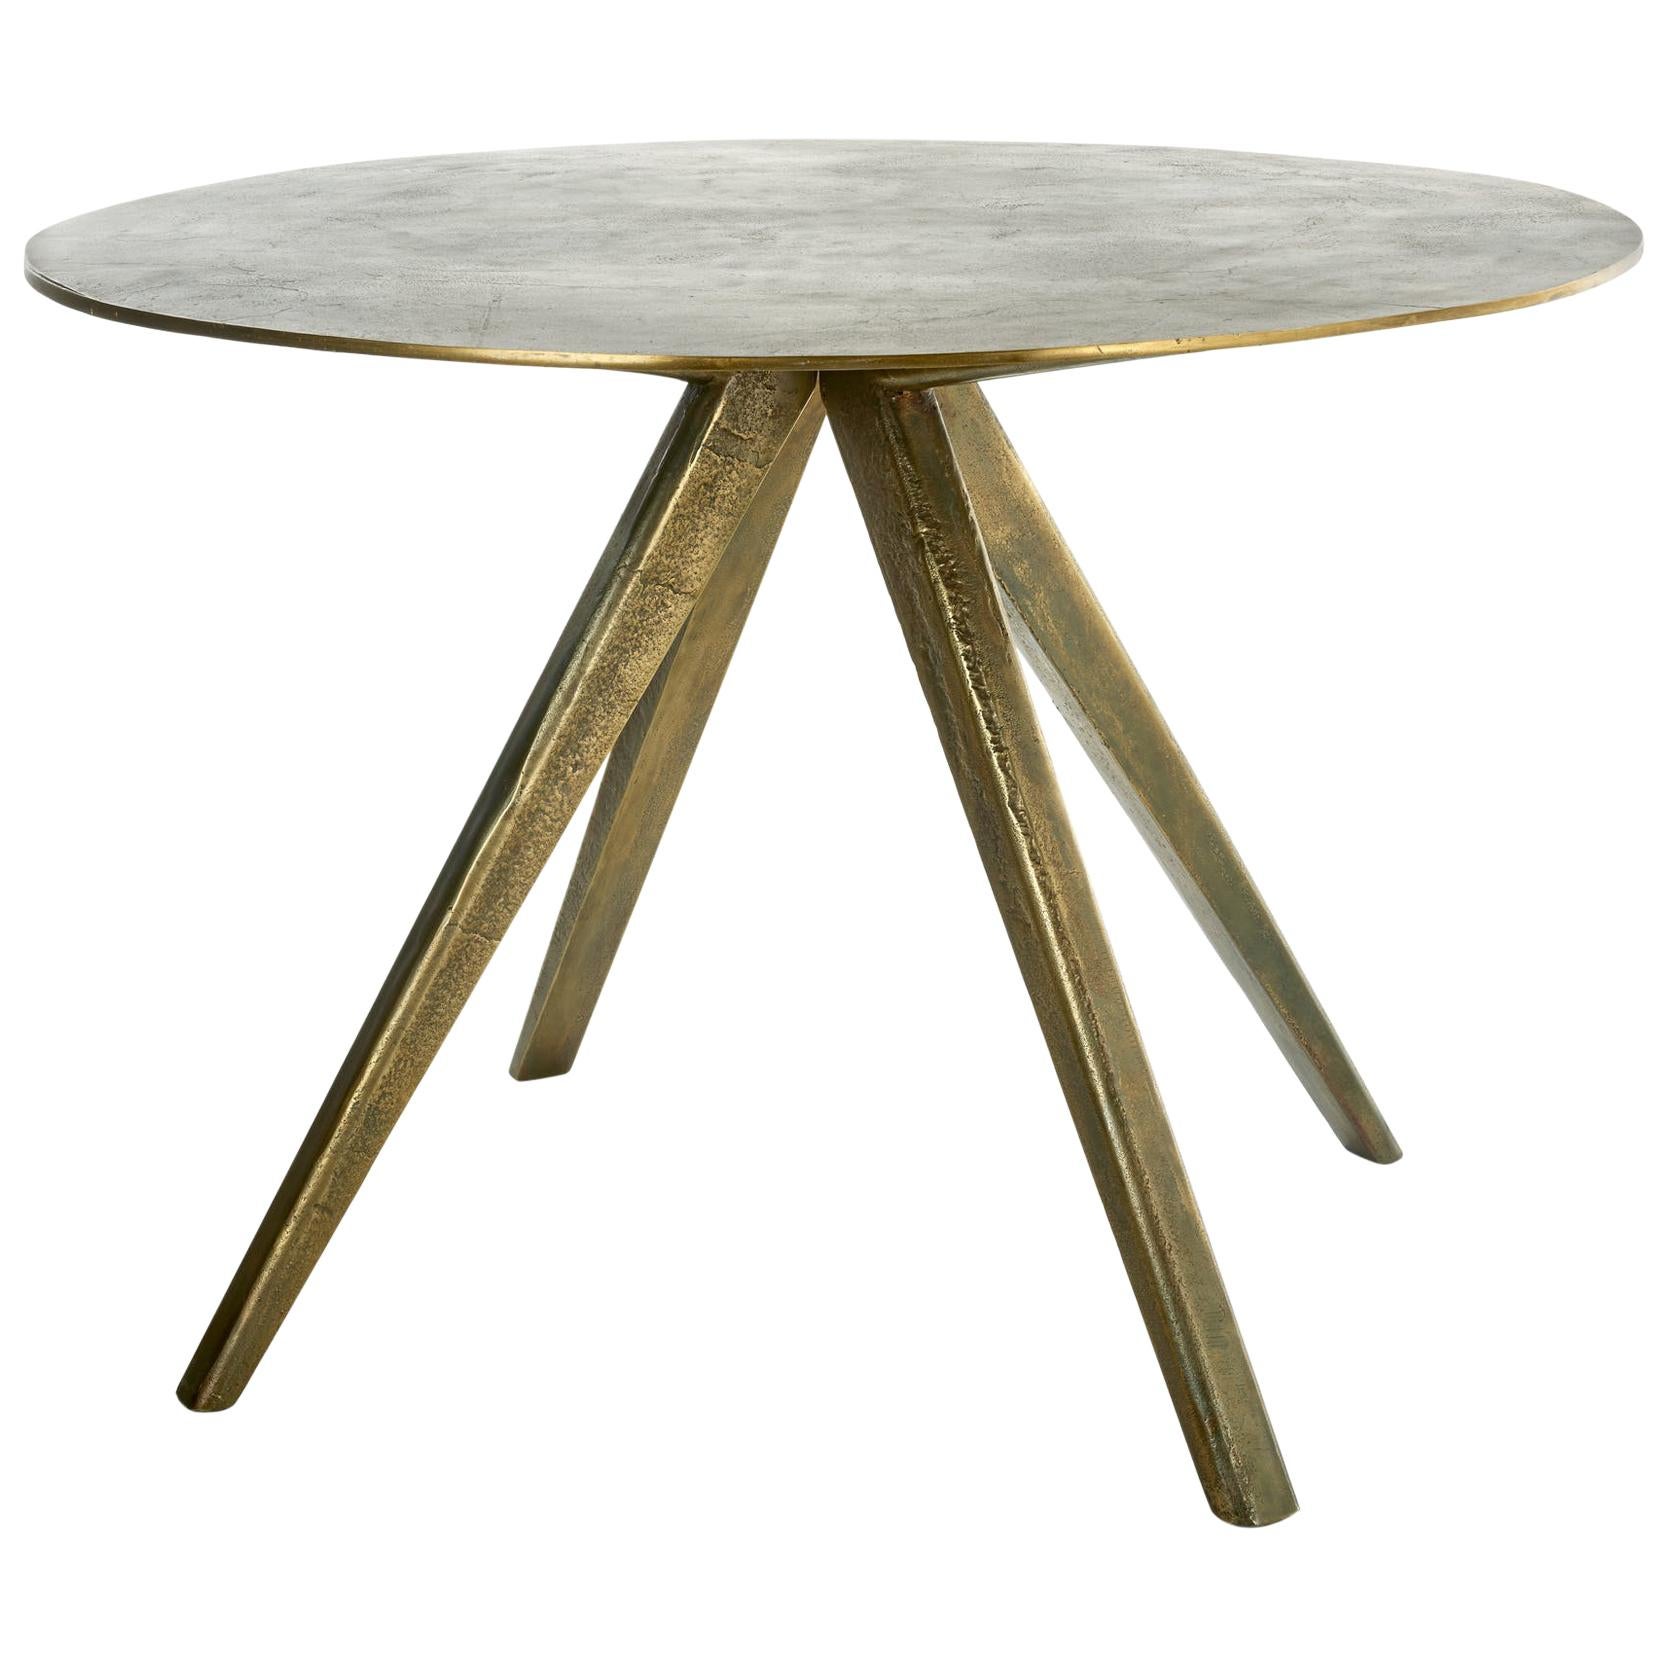 Antique Brass Plated Circle Table, Pols Potten Studio For Sale